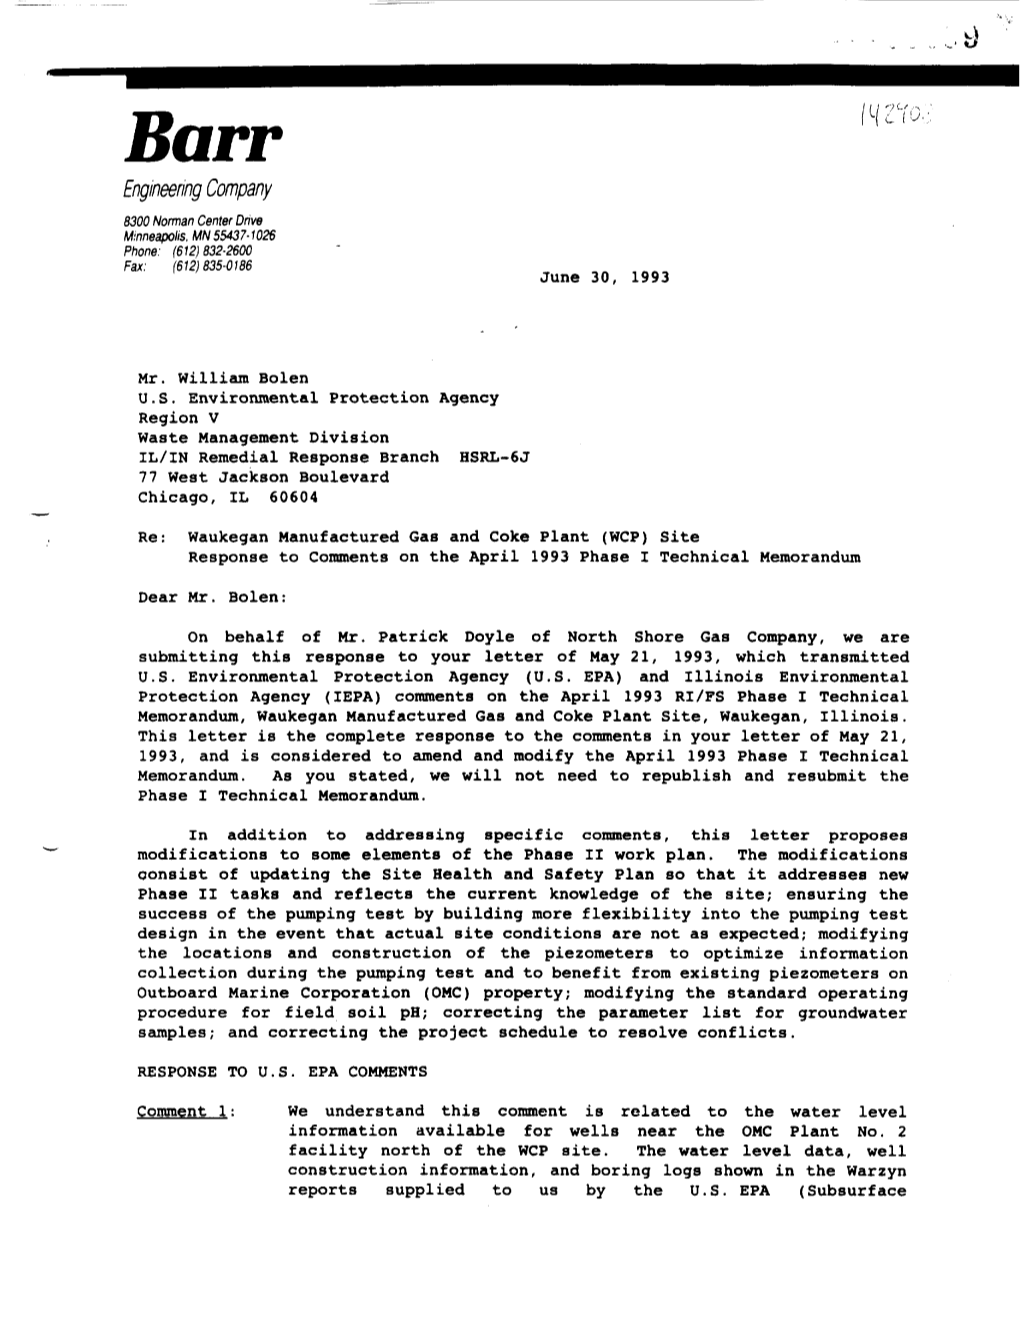 Waukegan Manufactured Gas and Coke Plant (WCP) Site Response to Comments on the April 1993 Phase I Technical Memorandum